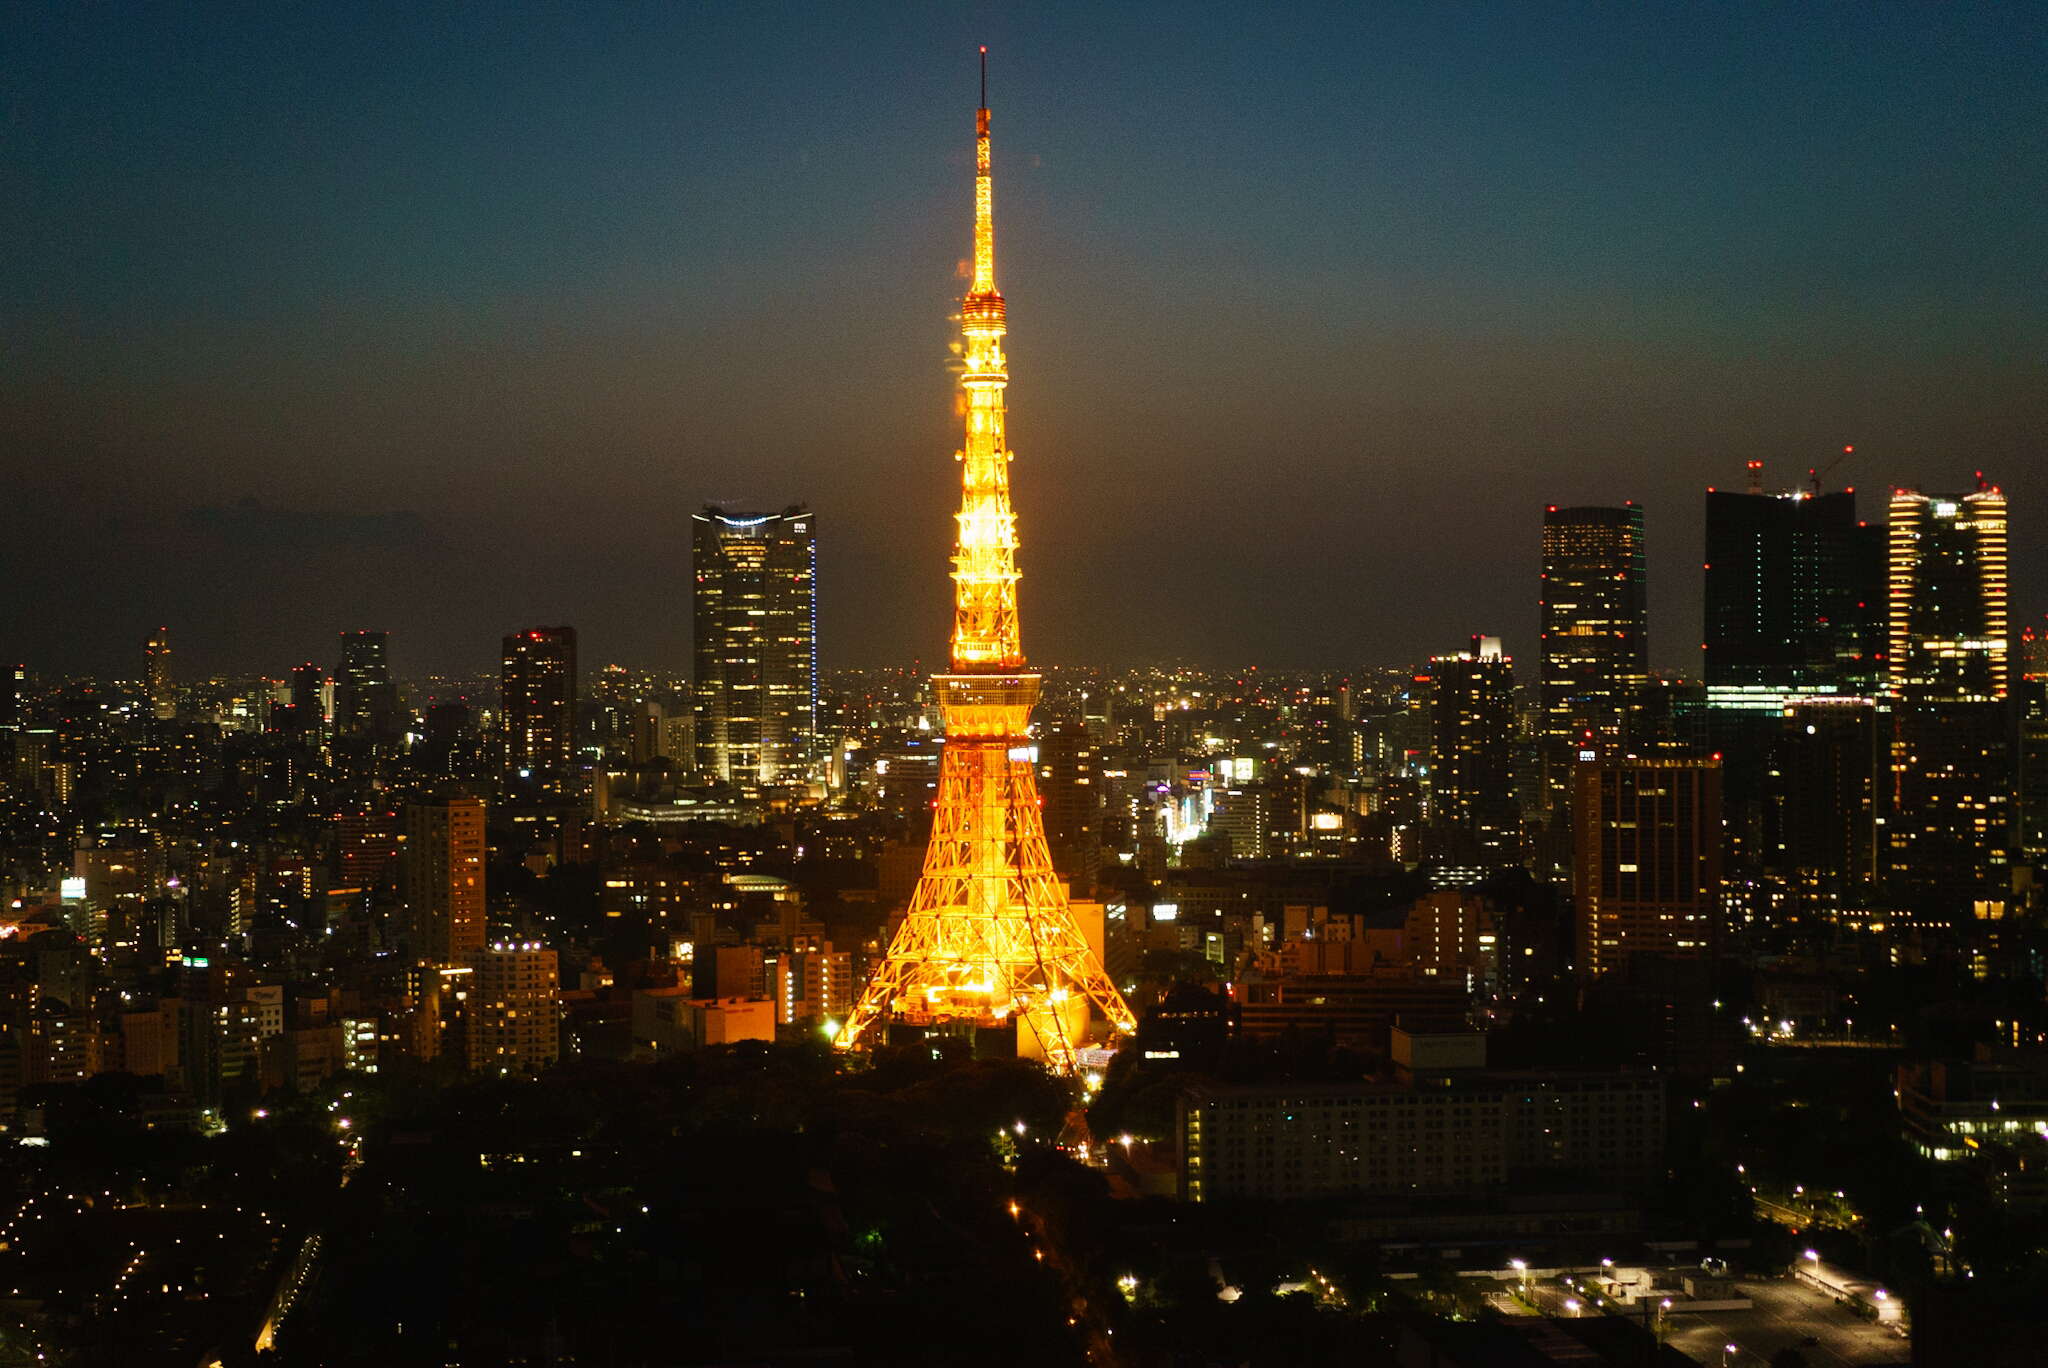 Tokyo tower from the World Trade Center